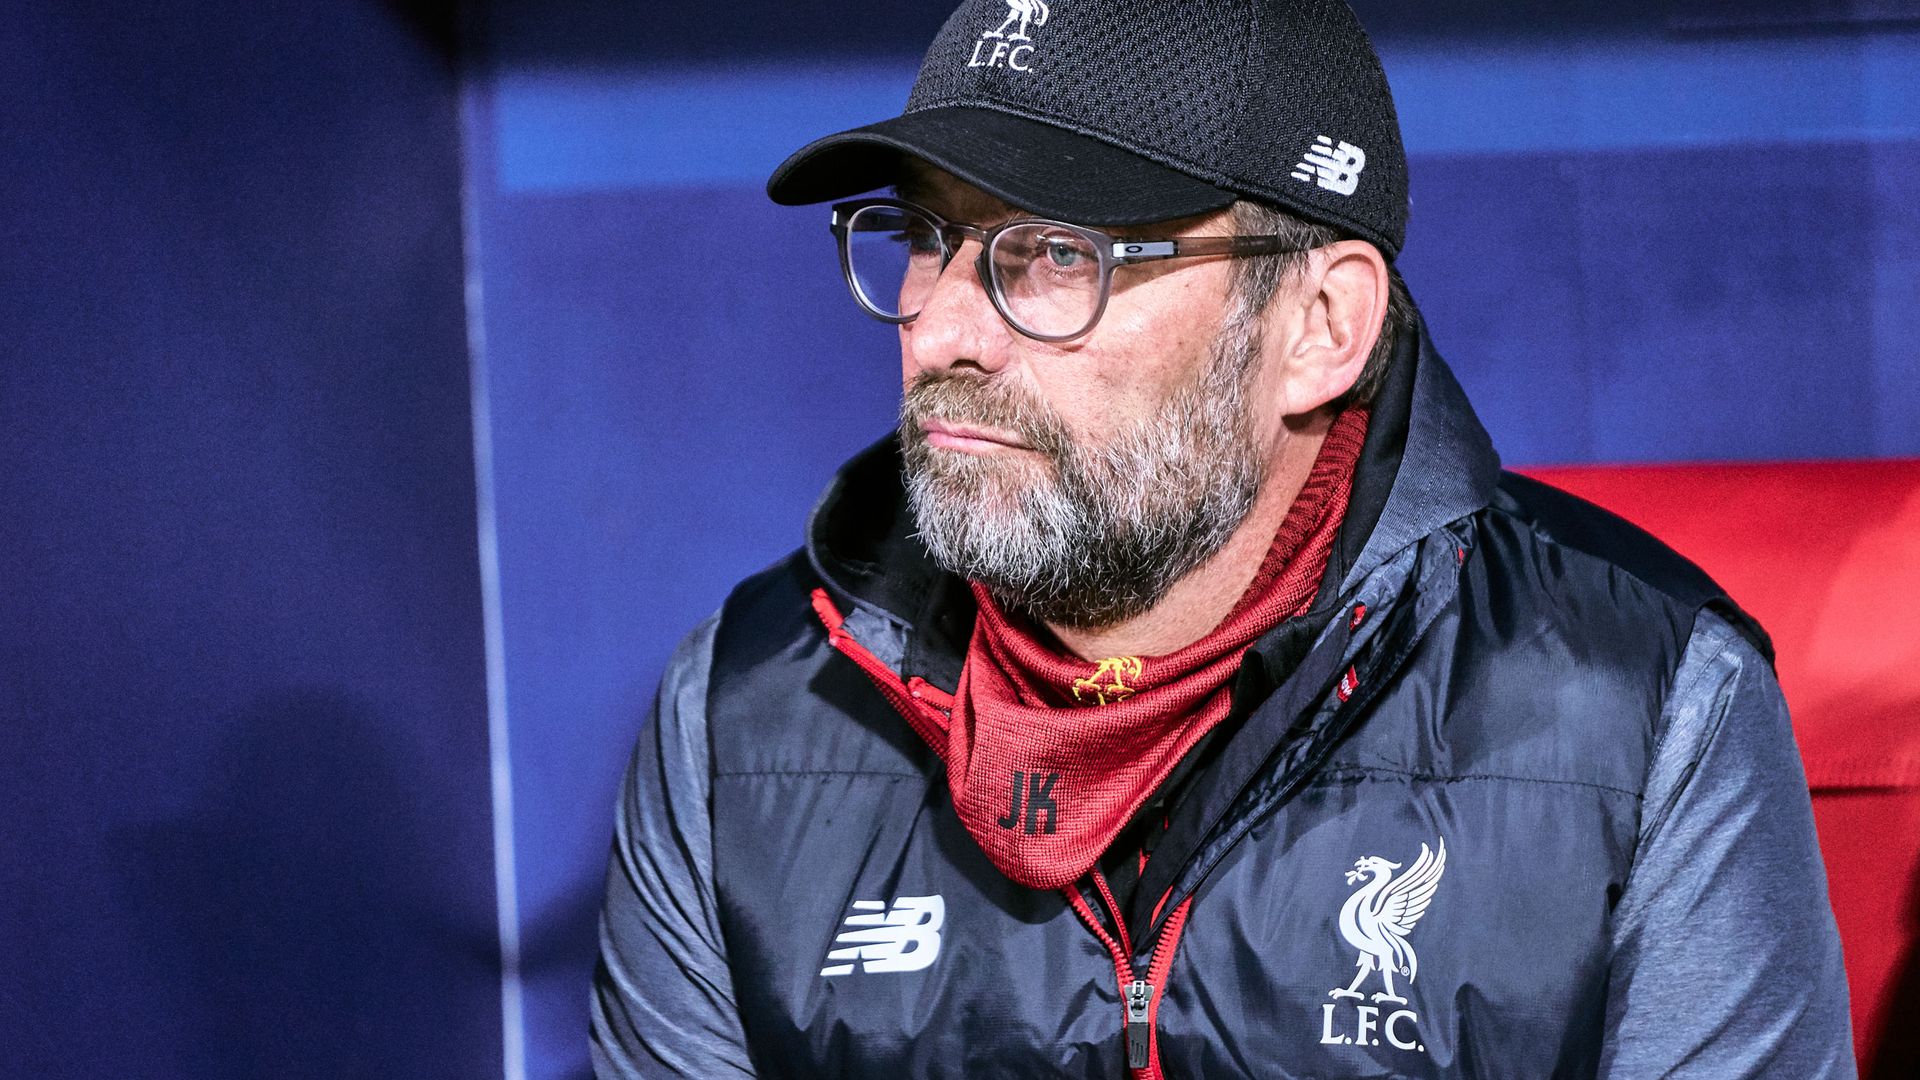 Klopp: Liverpool do not need to spend big